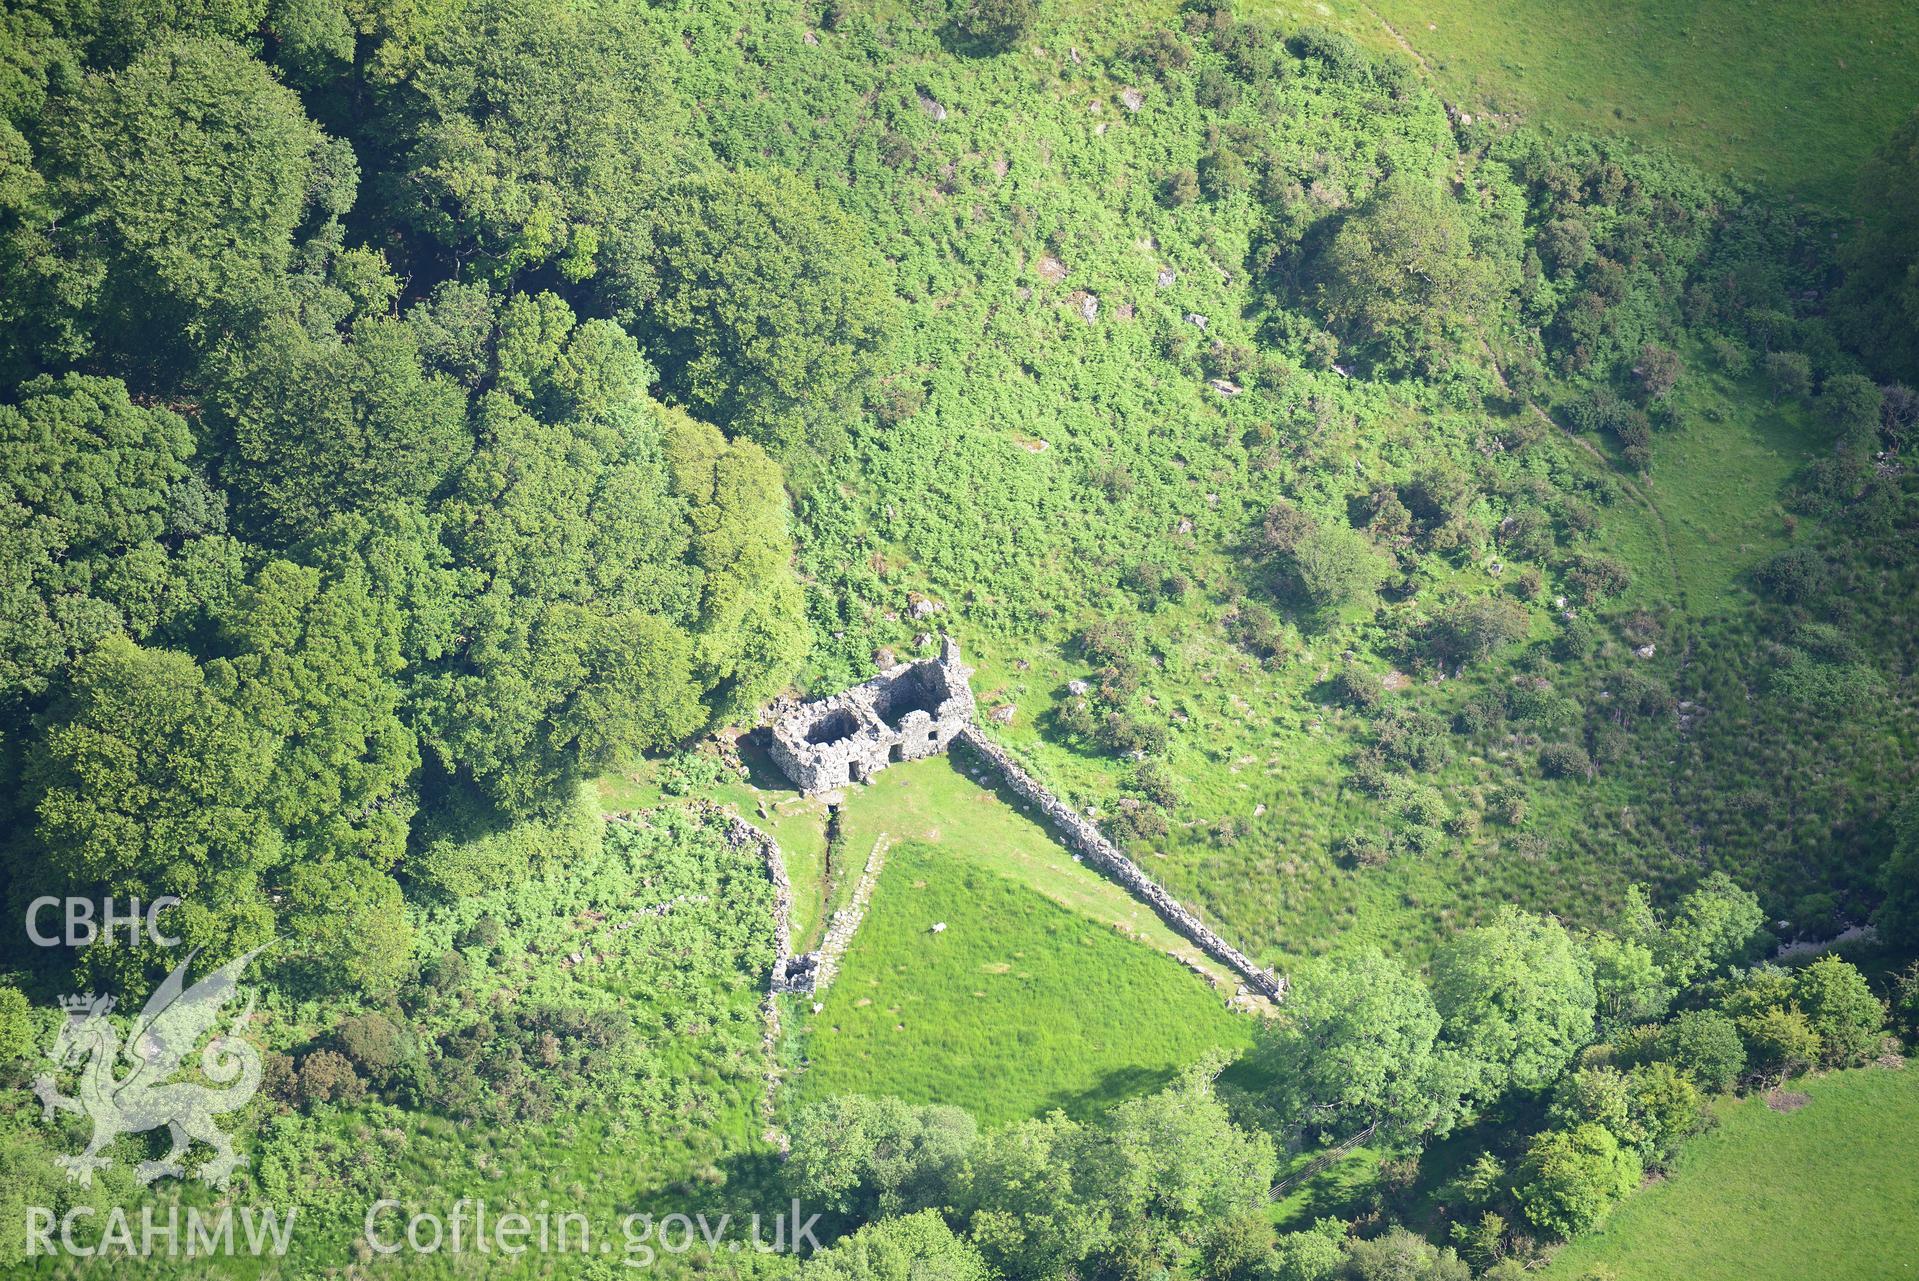 Ffynnon Gybi holy well, near Llanystumdwy. Oblique aerial photograph taken during the Royal Commission's programme of archaeological aerial reconnaissance by Toby Driver on 23rd June 2015.